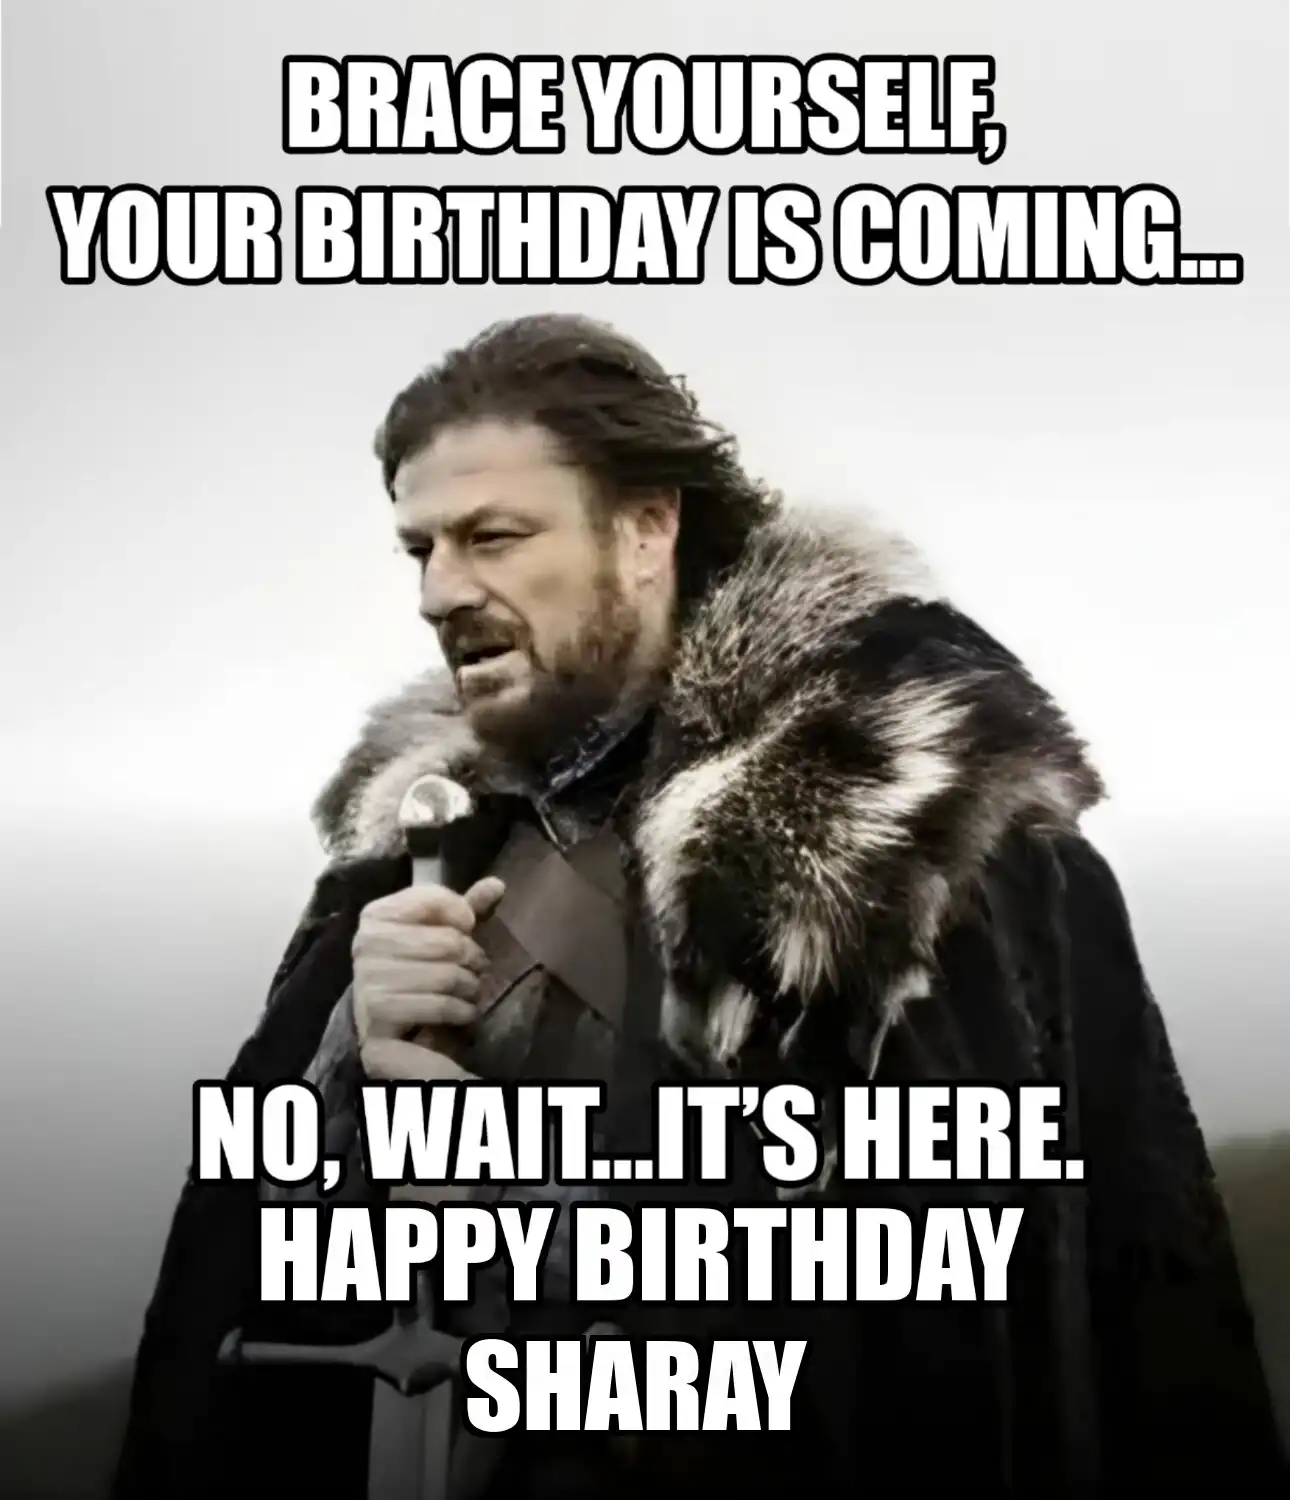 Happy Birthday Sharay Brace Yourself Your Birthday Is Coming Meme